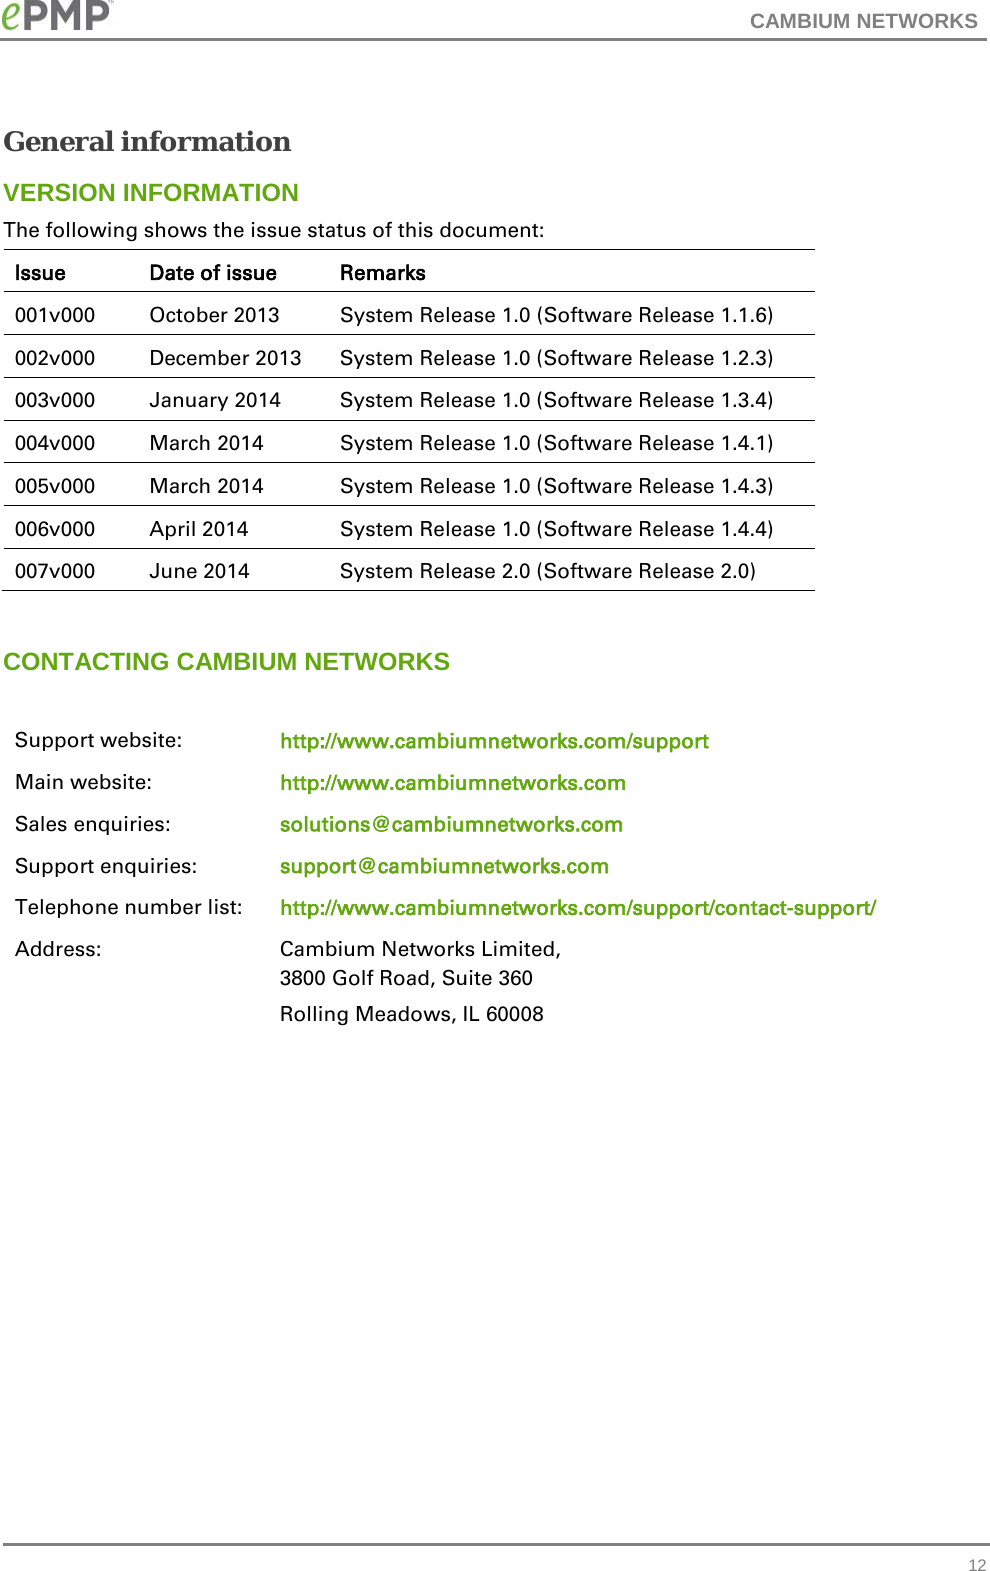 CAMBIUM NETWORKS  General information VERSION INFORMATION The following shows the issue status of this document: Issue Date of issue Remarks 001v000  October 2013 System Release 1.0 (Software Release 1.1.6) 002v000  December 2013 System Release 1.0 (Software Release 1.2.3) 003v000 January 2014 System Release 1.0 (Software Release 1.3.4) 004v000 March 2014 System Release 1.0 (Software Release 1.4.1) 005v000 March 2014 System Release 1.0 (Software Release 1.4.3) 006v000 April 2014 System Release 1.0 (Software Release 1.4.4) 007v000 June 2014 System Release 2.0 (Software Release 2.0)  CONTACTING CAMBIUM NETWORKS  Support website: http://www.cambiumnetworks.com/support Main website: http://www.cambiumnetworks.com Sales enquiries: solutions@cambiumnetworks.com Support enquiries: support@cambiumnetworks.com Telephone number list: http://www.cambiumnetworks.com/support/contact-support/ Address:  Cambium Networks Limited, 3800 Golf Road, Suite 360 Rolling Meadows, IL 60008      12 